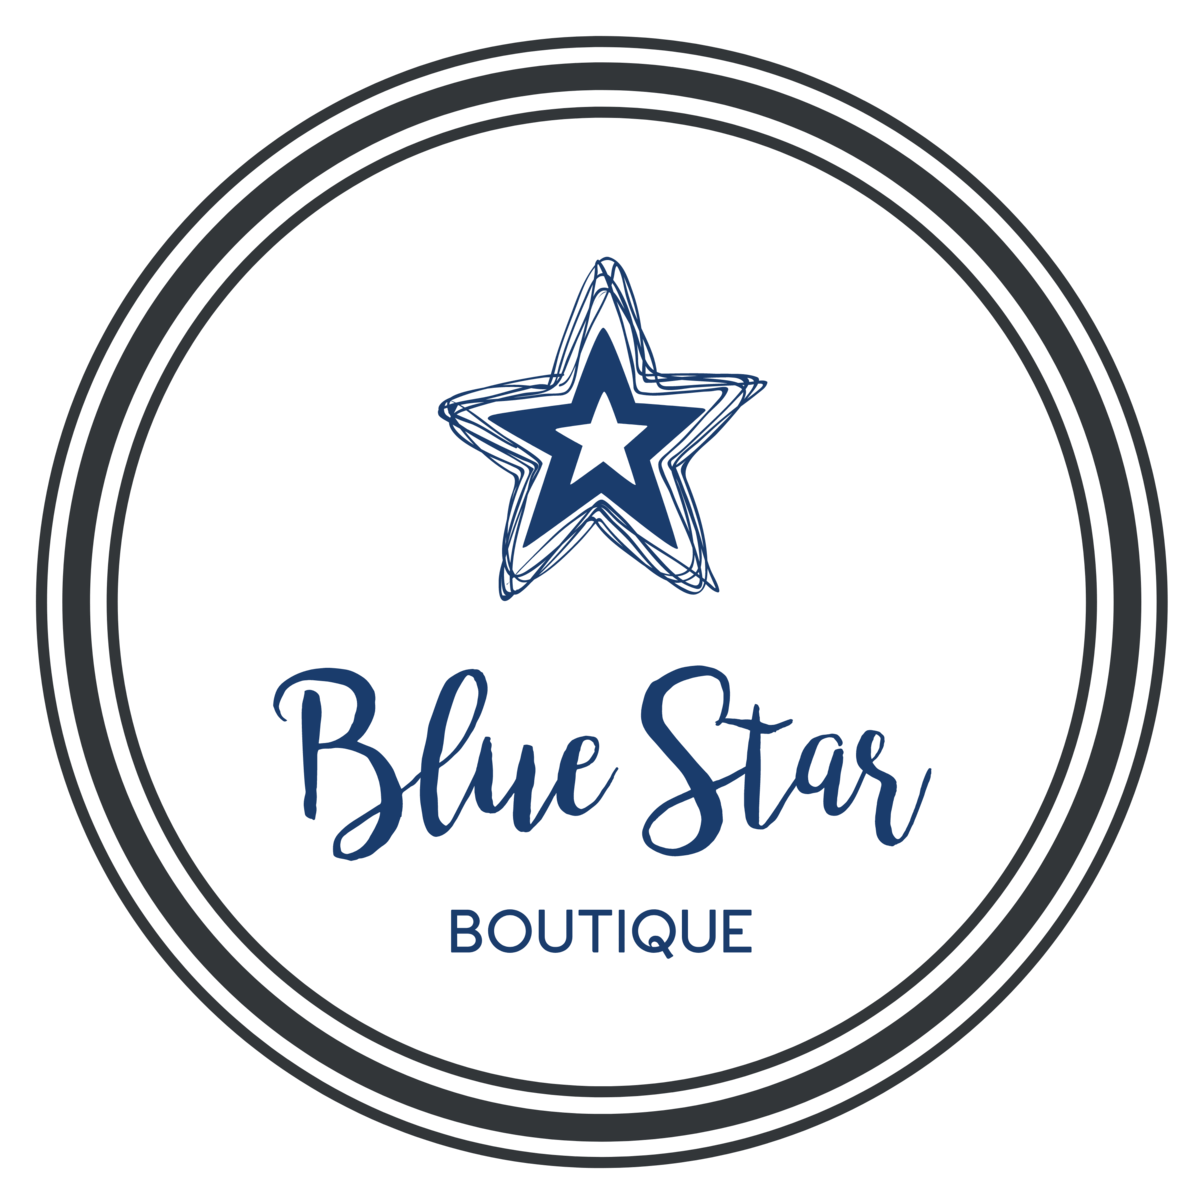 Blue Star in Circle Logo - Blue Star Boutique. Women's Boutique Clothing